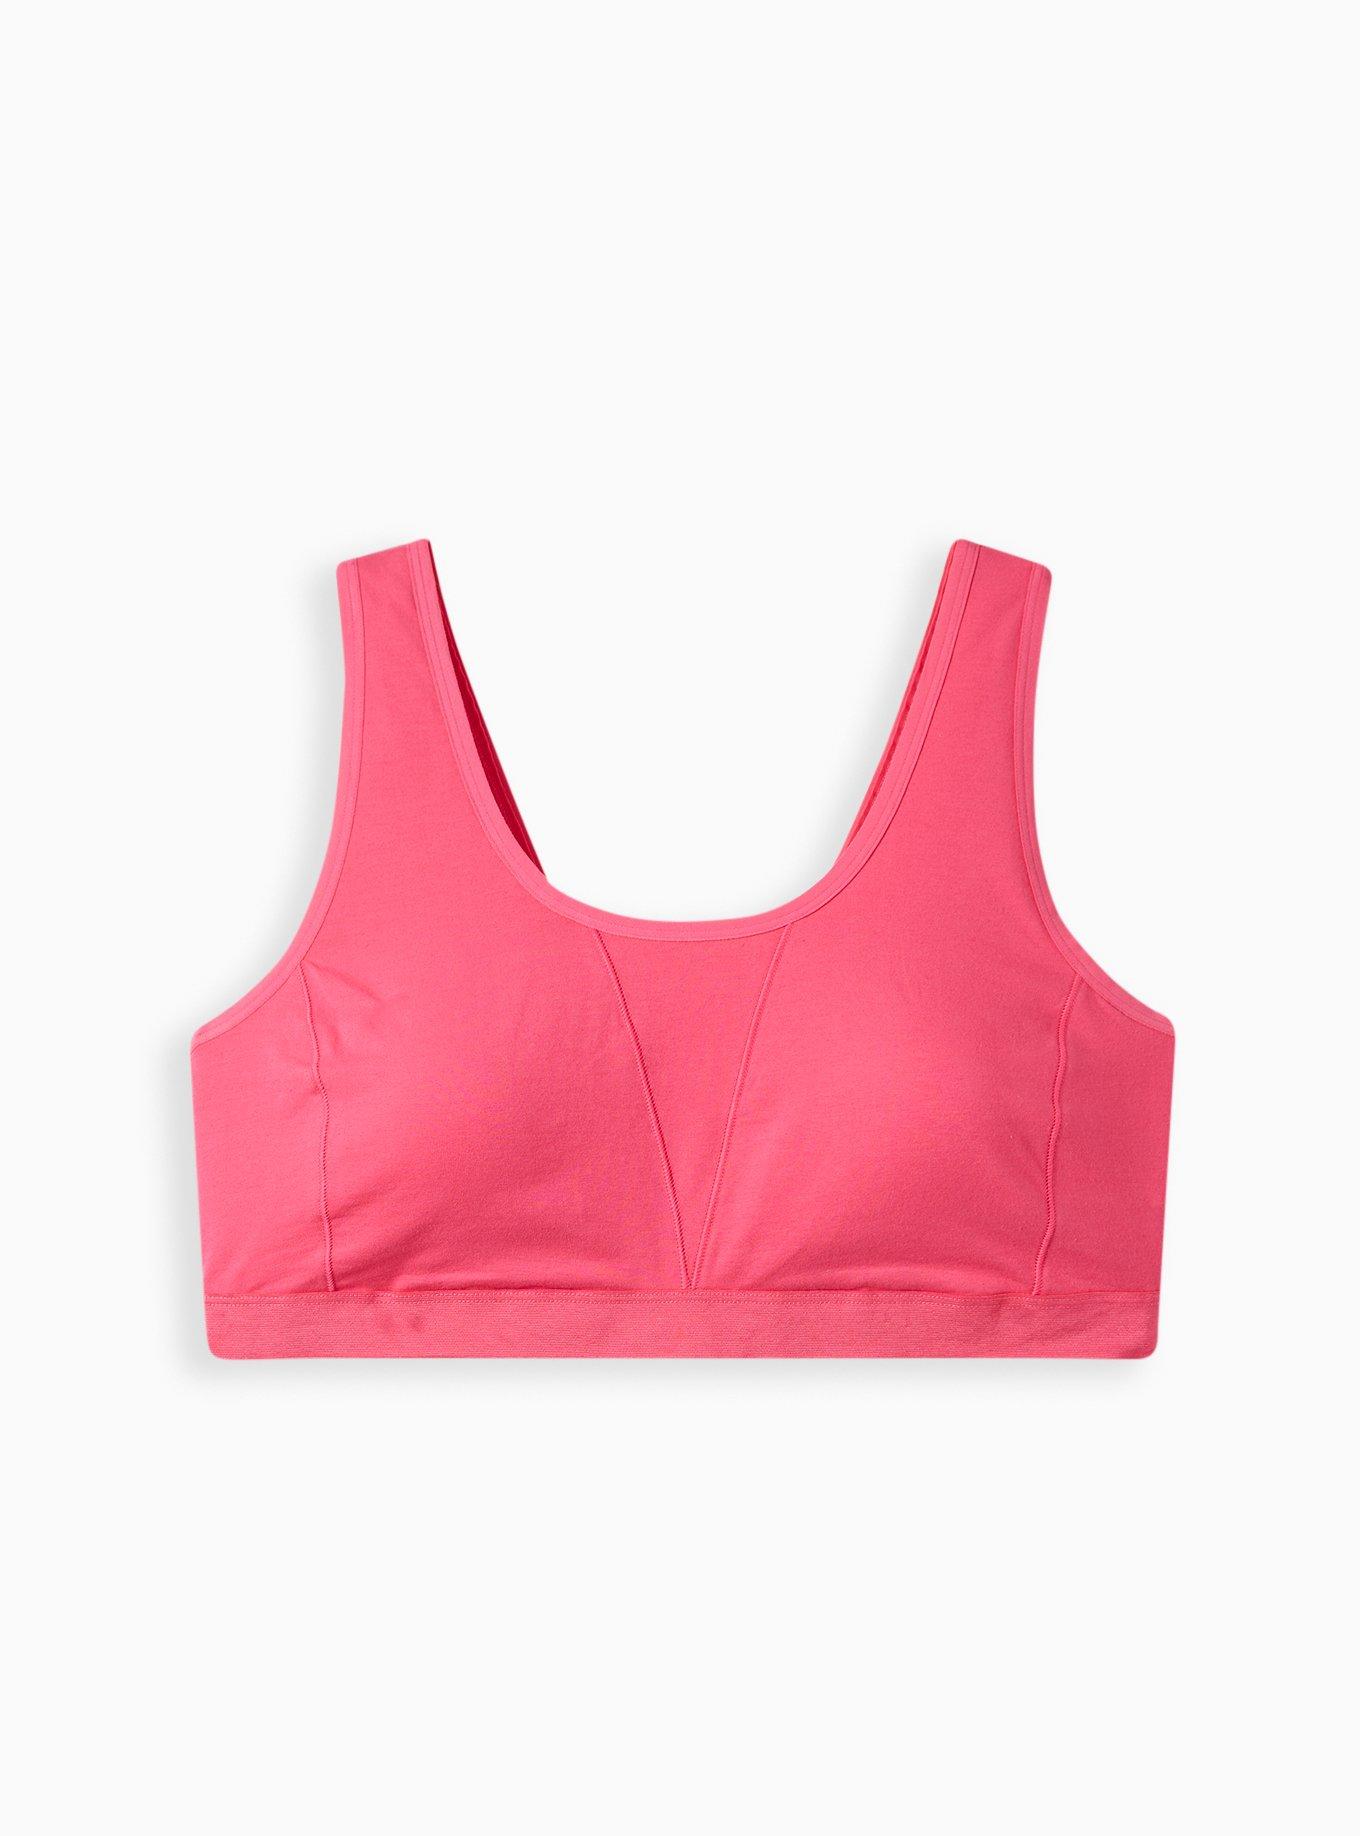 Comfortable Wireless Cotton Bra with Unlined Seamed Cups